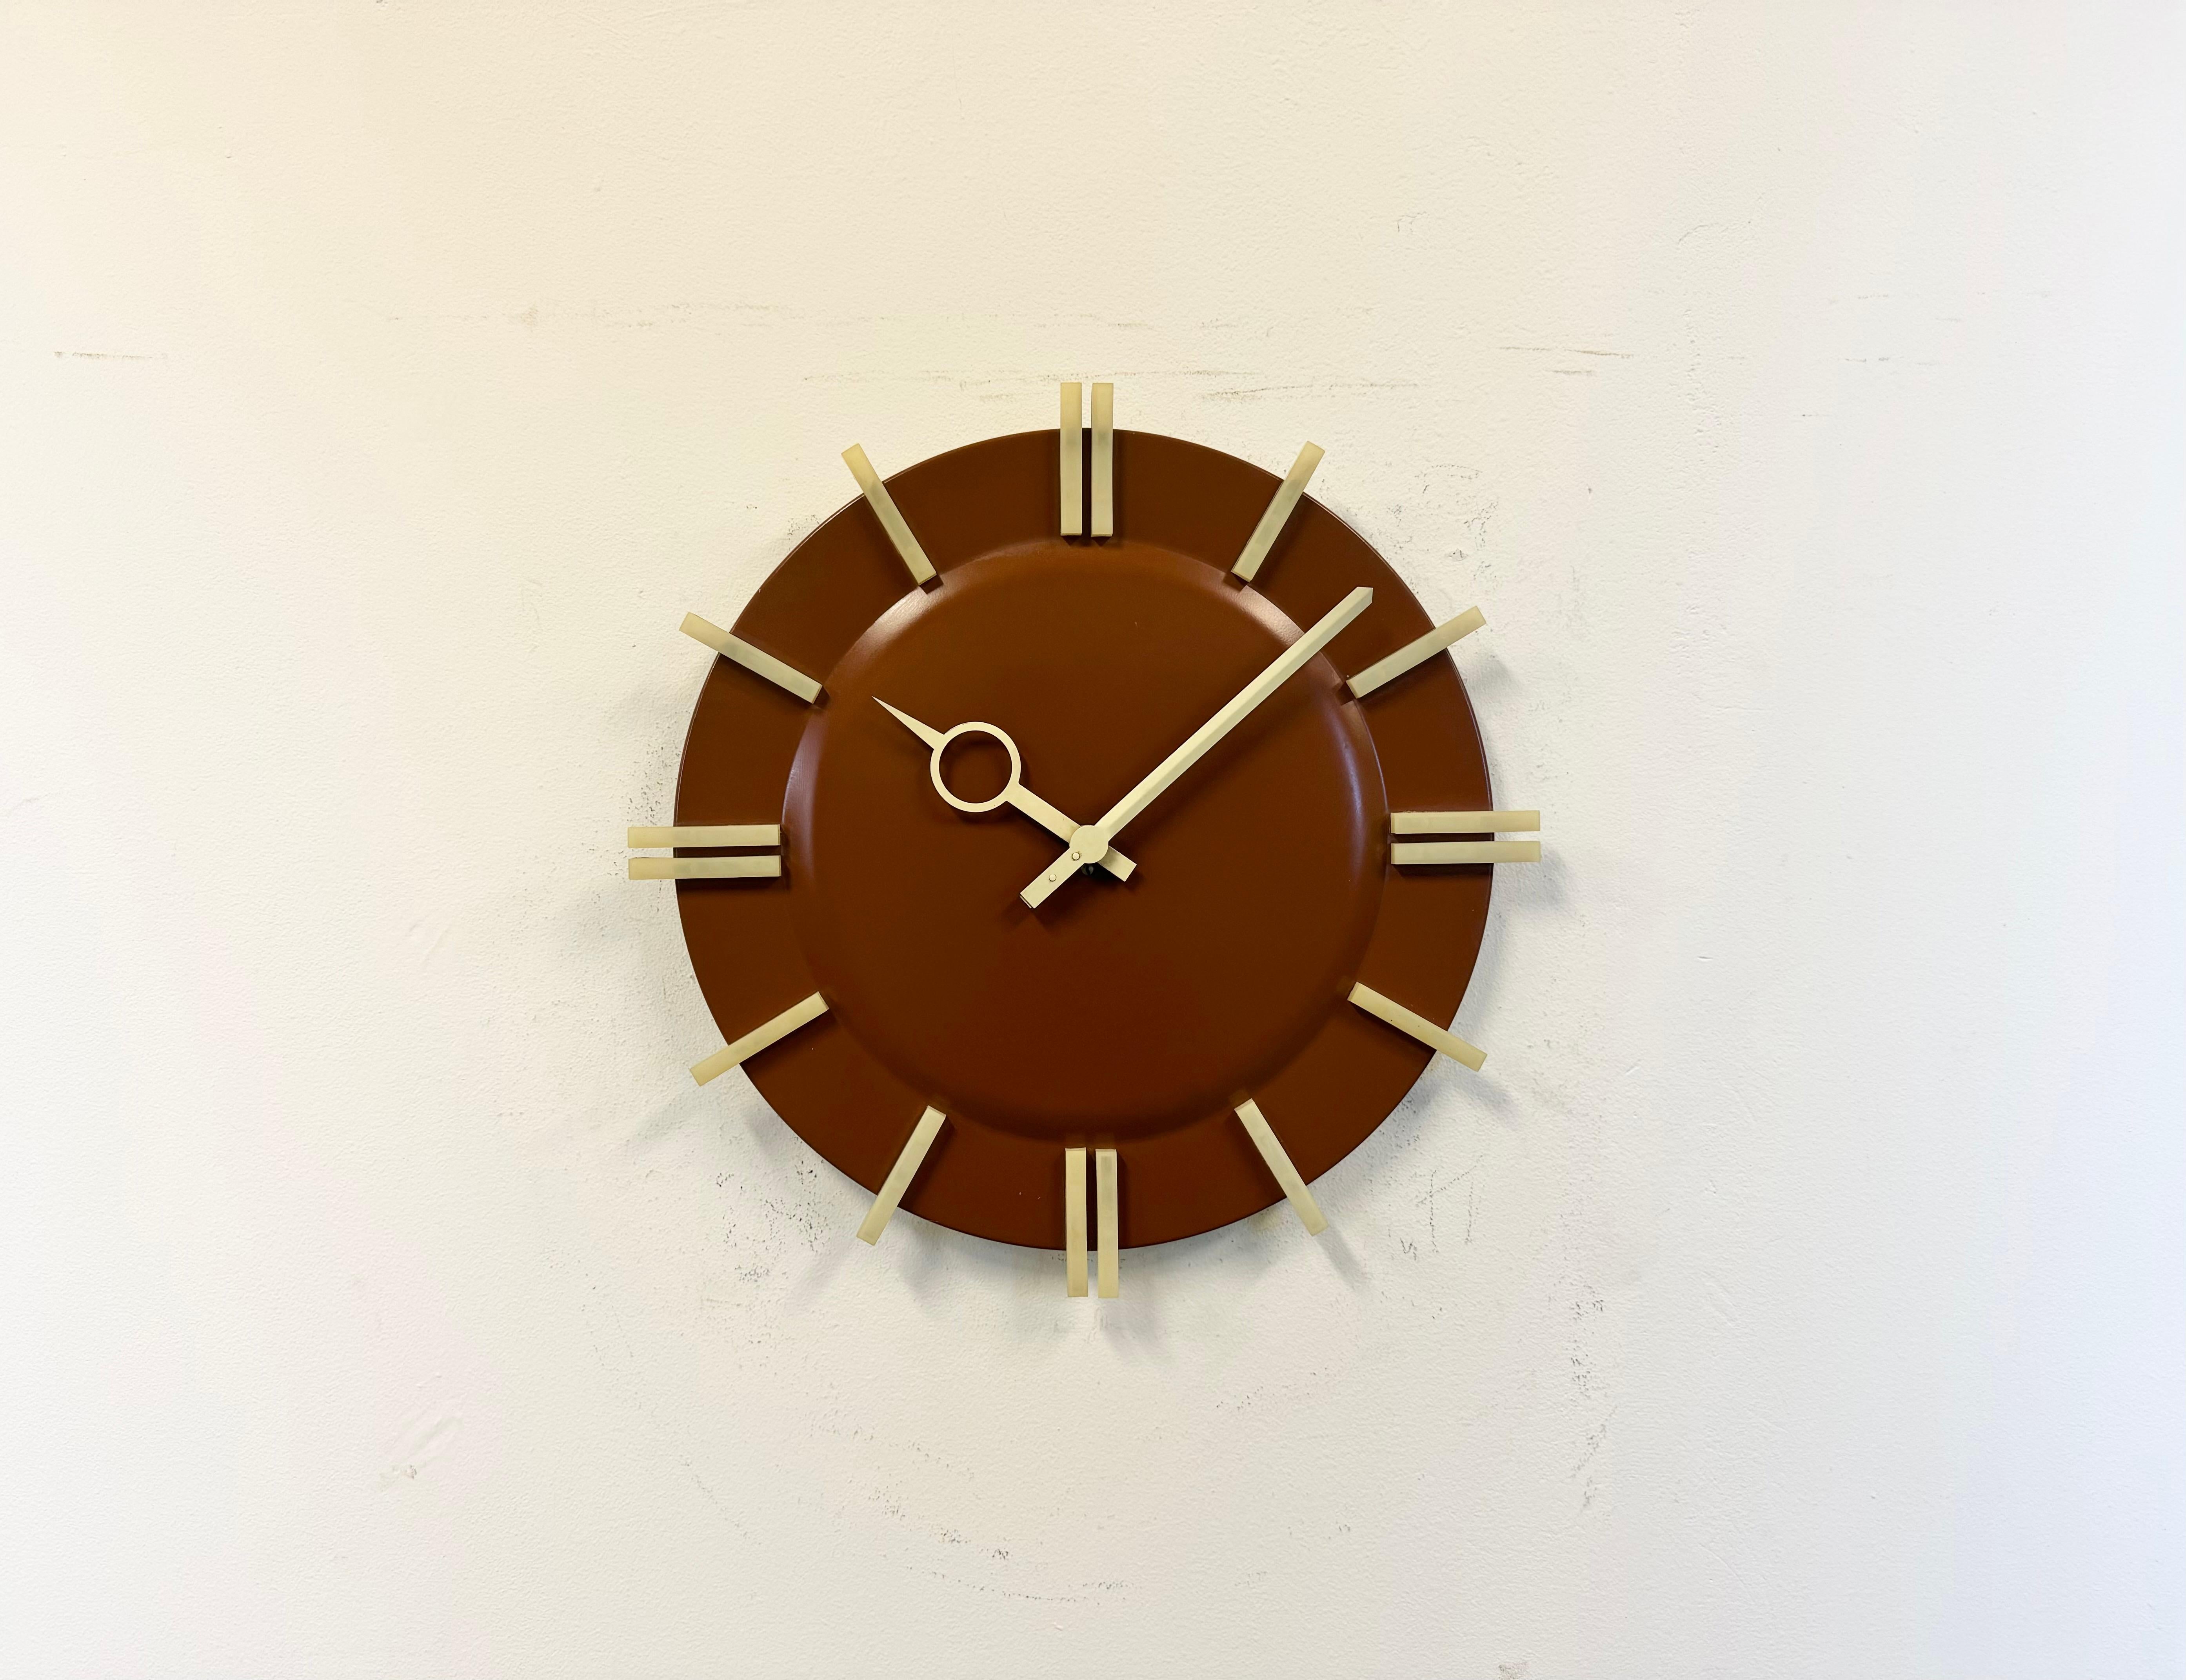 Pragotron PPH 413 is a type of indoor secondary clock. Was produced during the 1970s in former Czechoslovakia. Clock face with white plastic numerals is made from aluminum and has brown color. Diameter is 43 cm. The piece has been converted into a